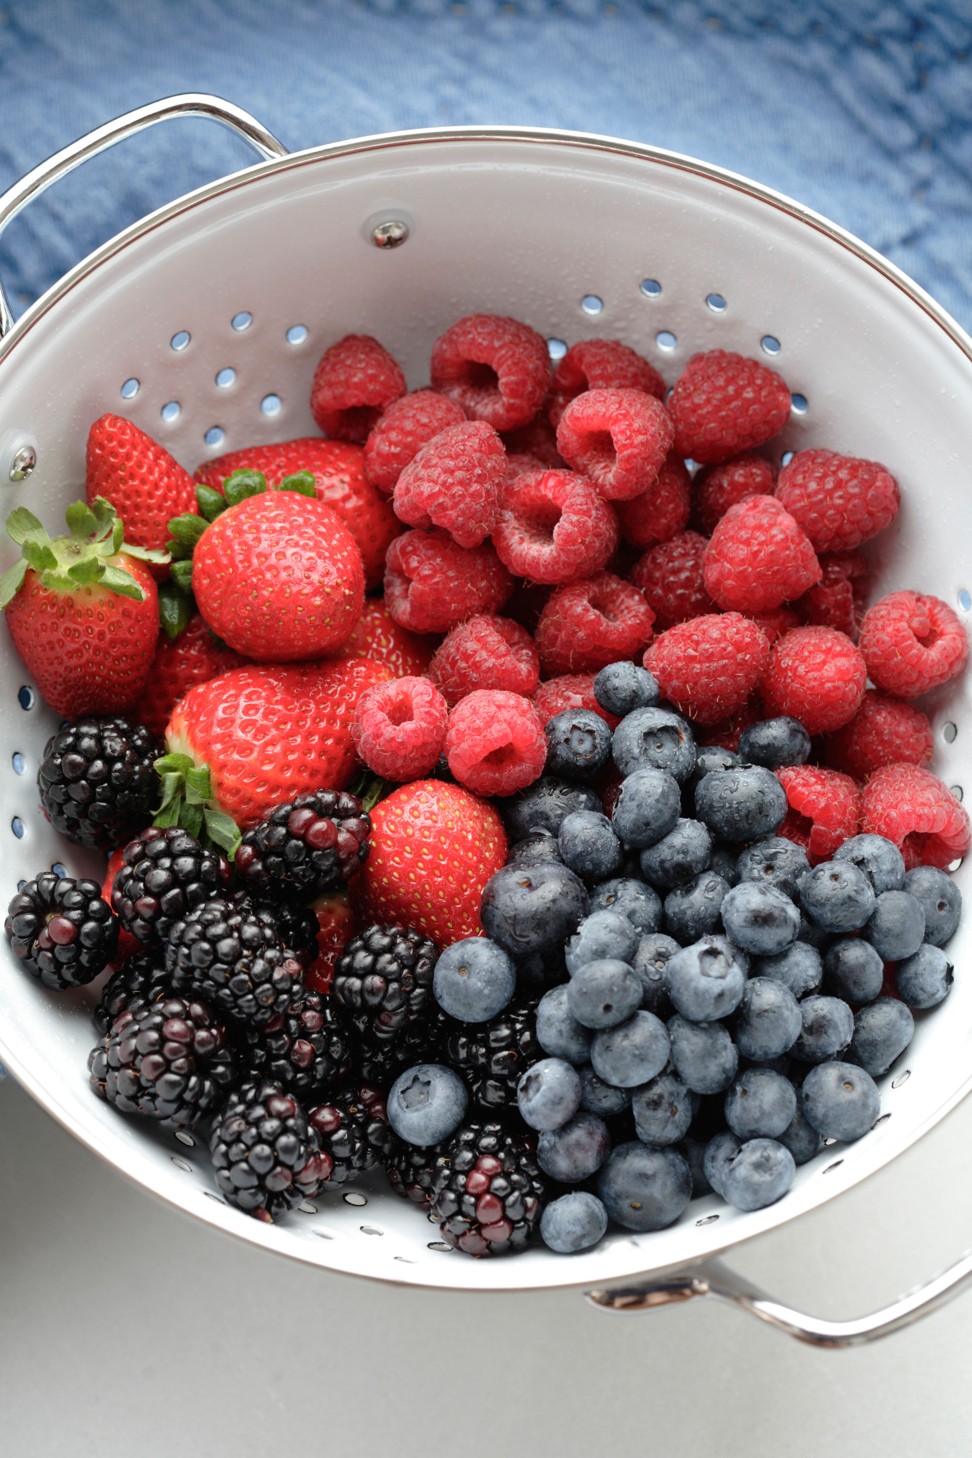 Berries are good for your brain health.